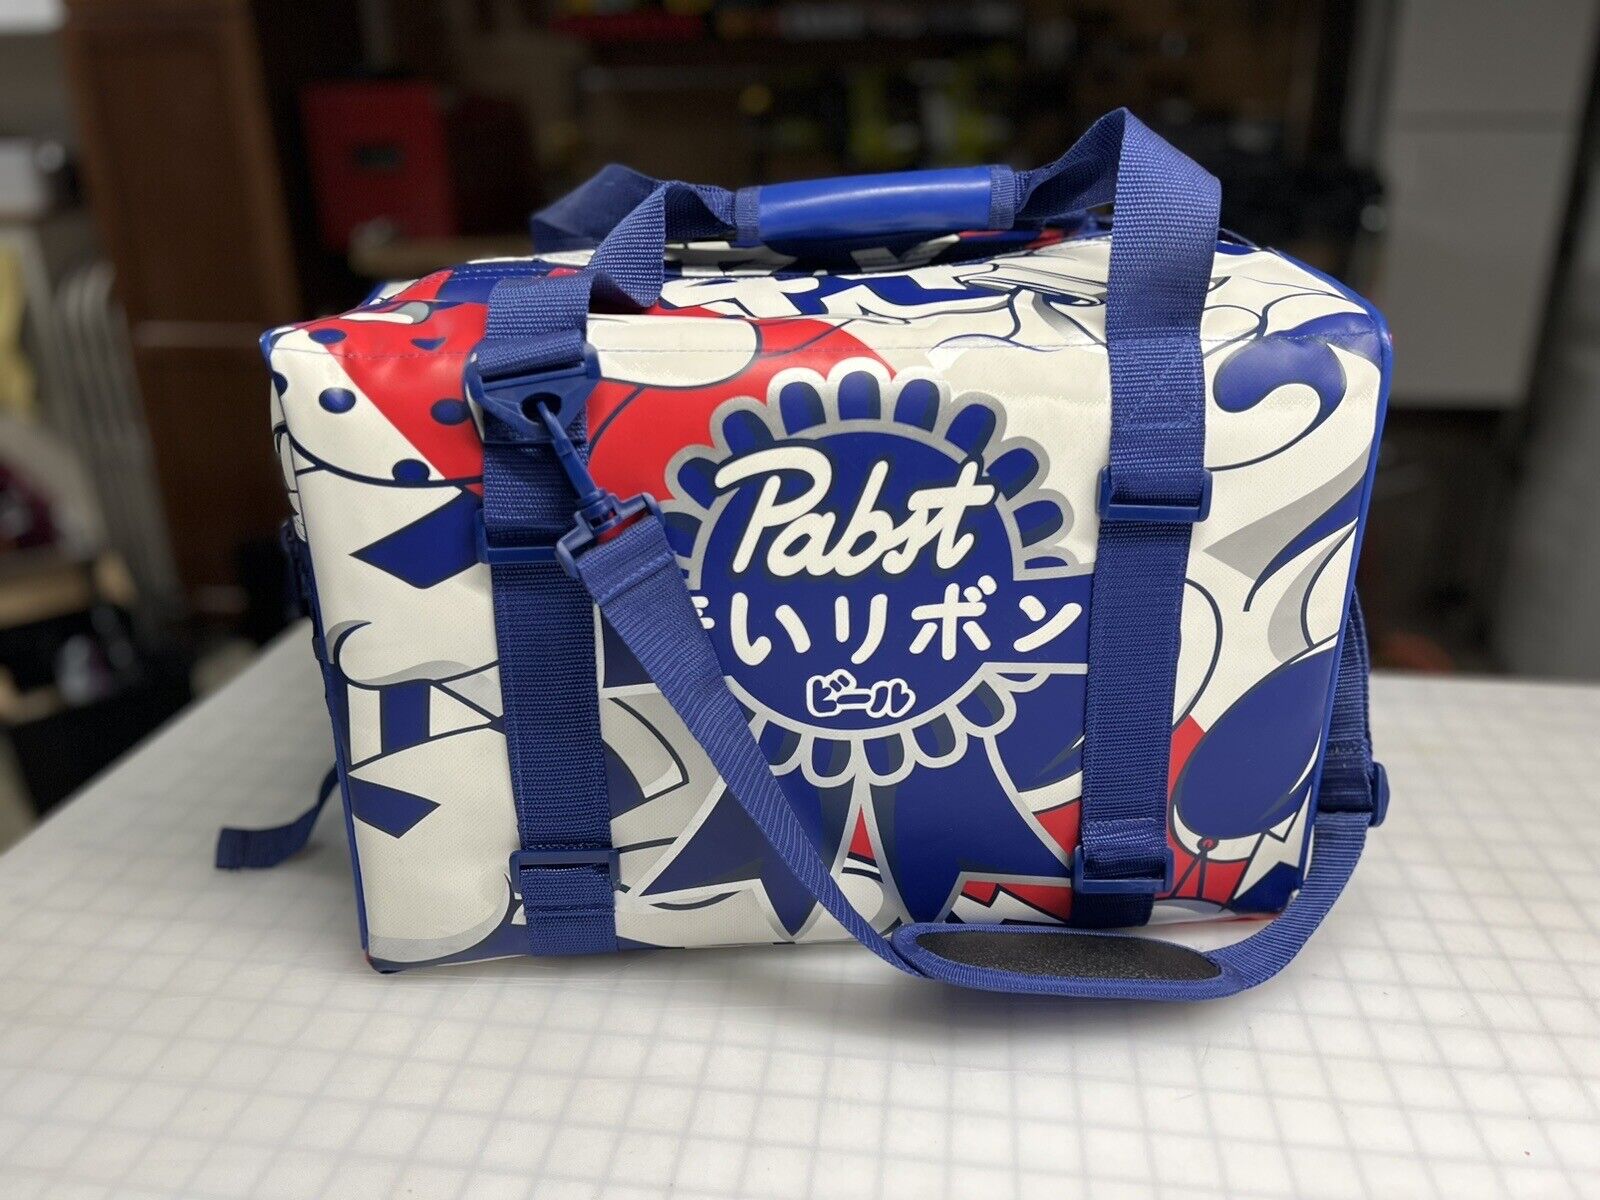 Pabst Blue Ribbon 24 Can Cooler Limited PBR Insulated Gaijin Arts 2018 RARE